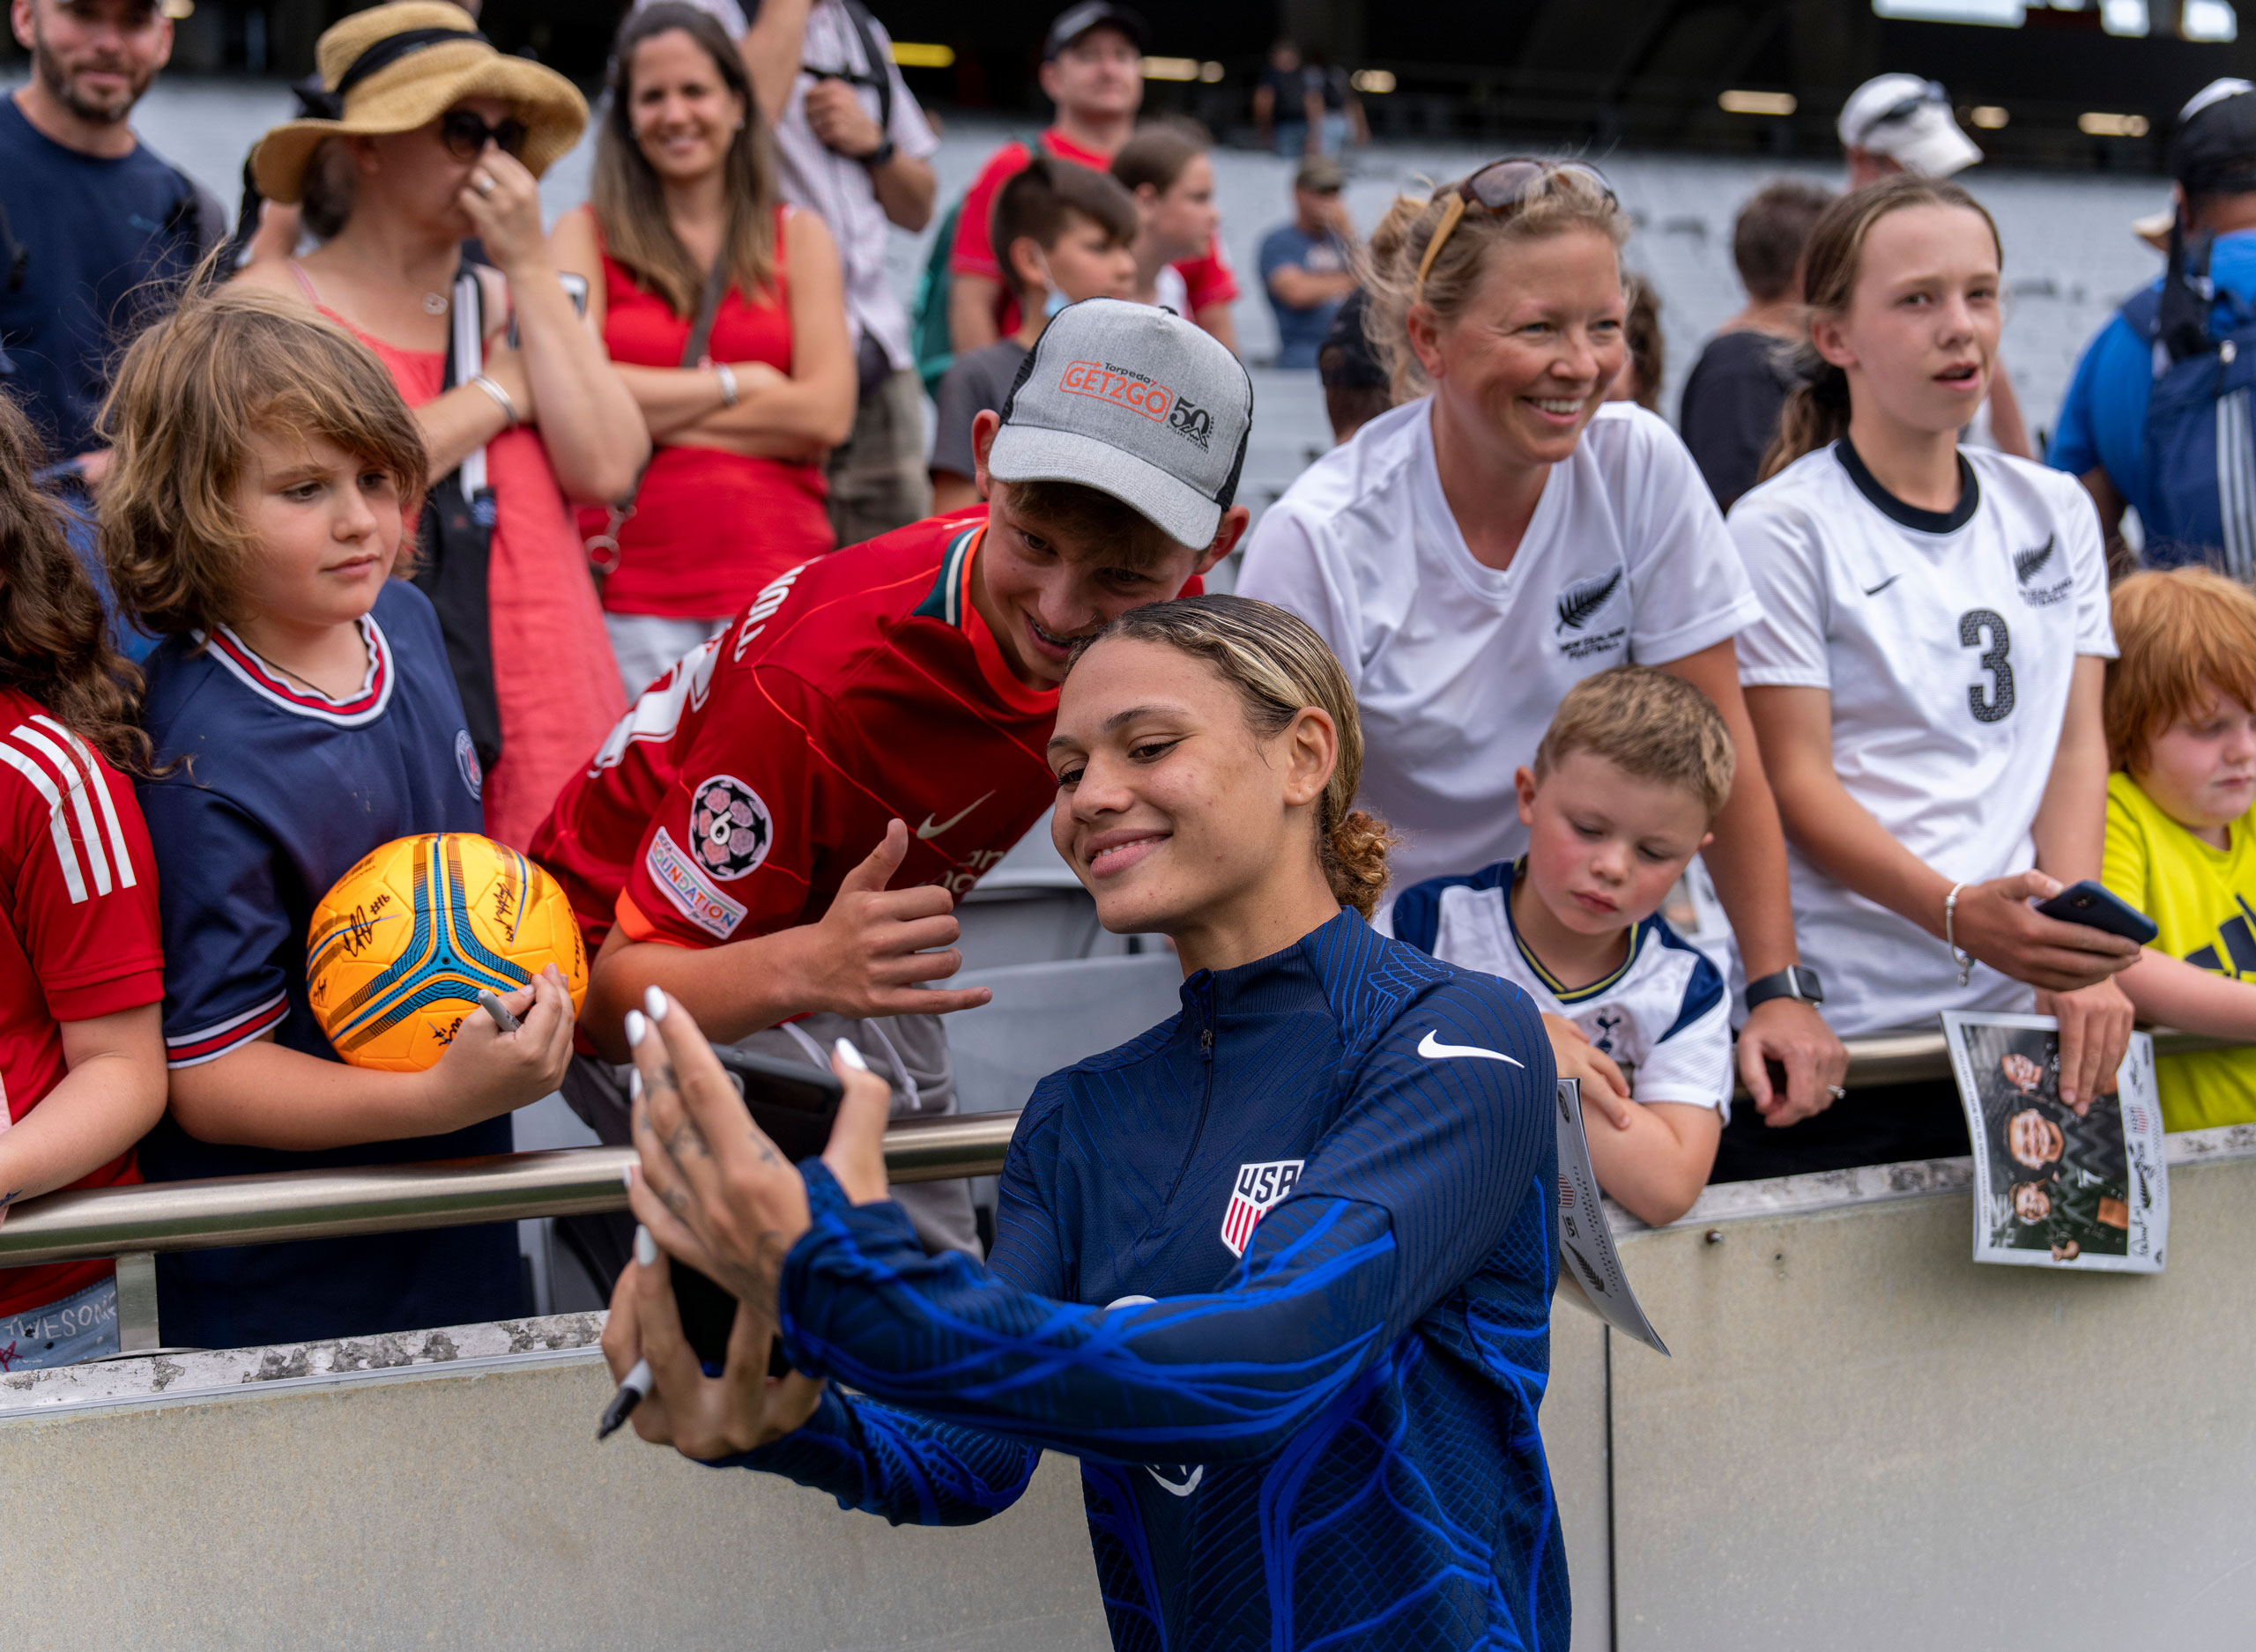 Trinity Rodman takes a selfie with fans after a game between New Zealand and USWNT at Eden Park in Auckland, New Zealand, on Jan. 21, 2023. (Brad Smith—ISI Photos/Getty Images)